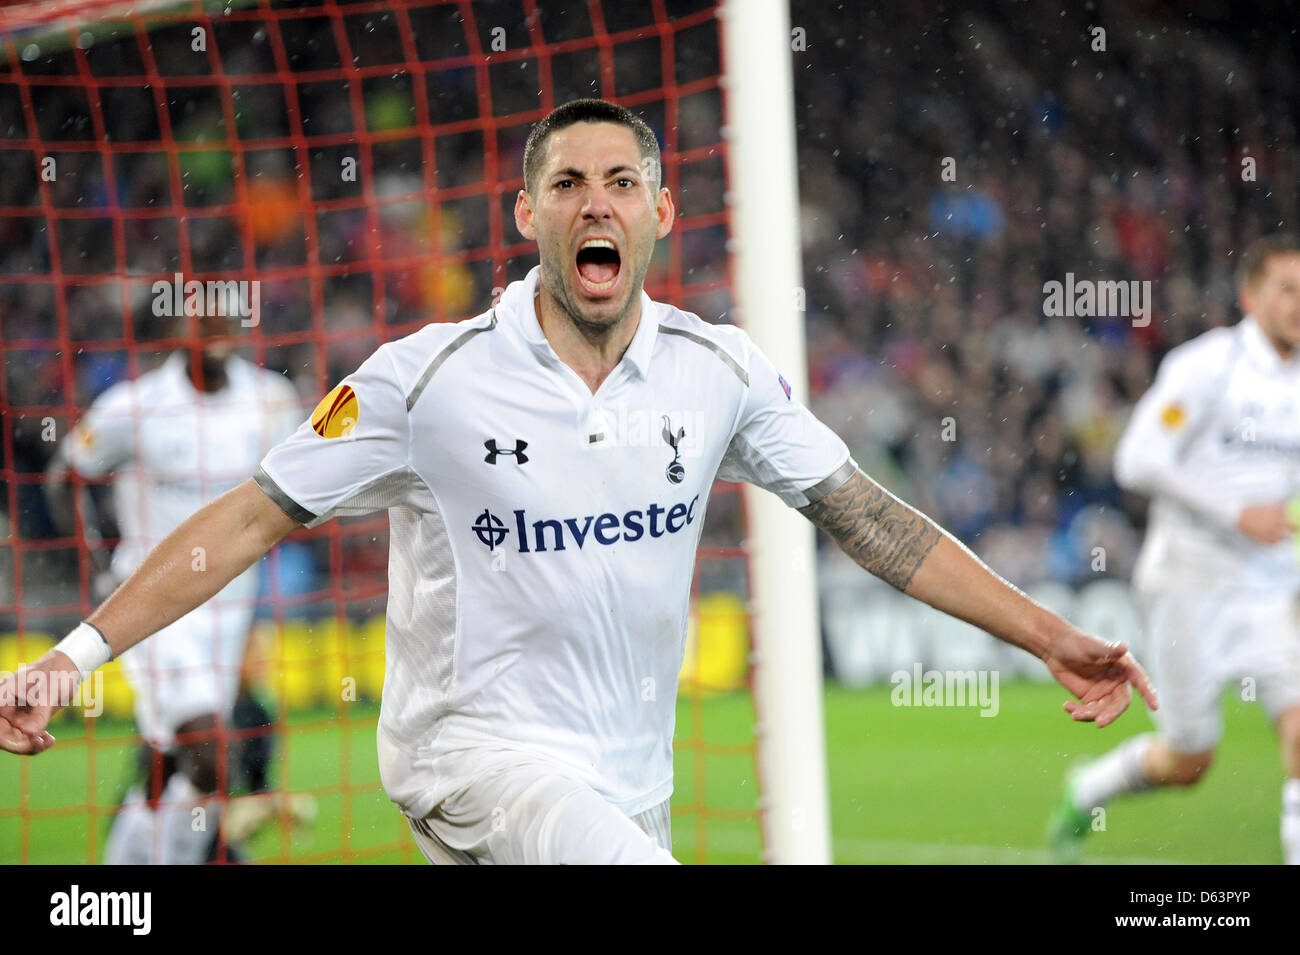 Basel, Switzerland. 11th April 2013. Clint Dempsey of Tottenham Hotspur celebrates his equaliser for 2-2 late in the Europa League game between FC Basel and Tottenham Hotspur from St. Jakob-Park. Stock Photo